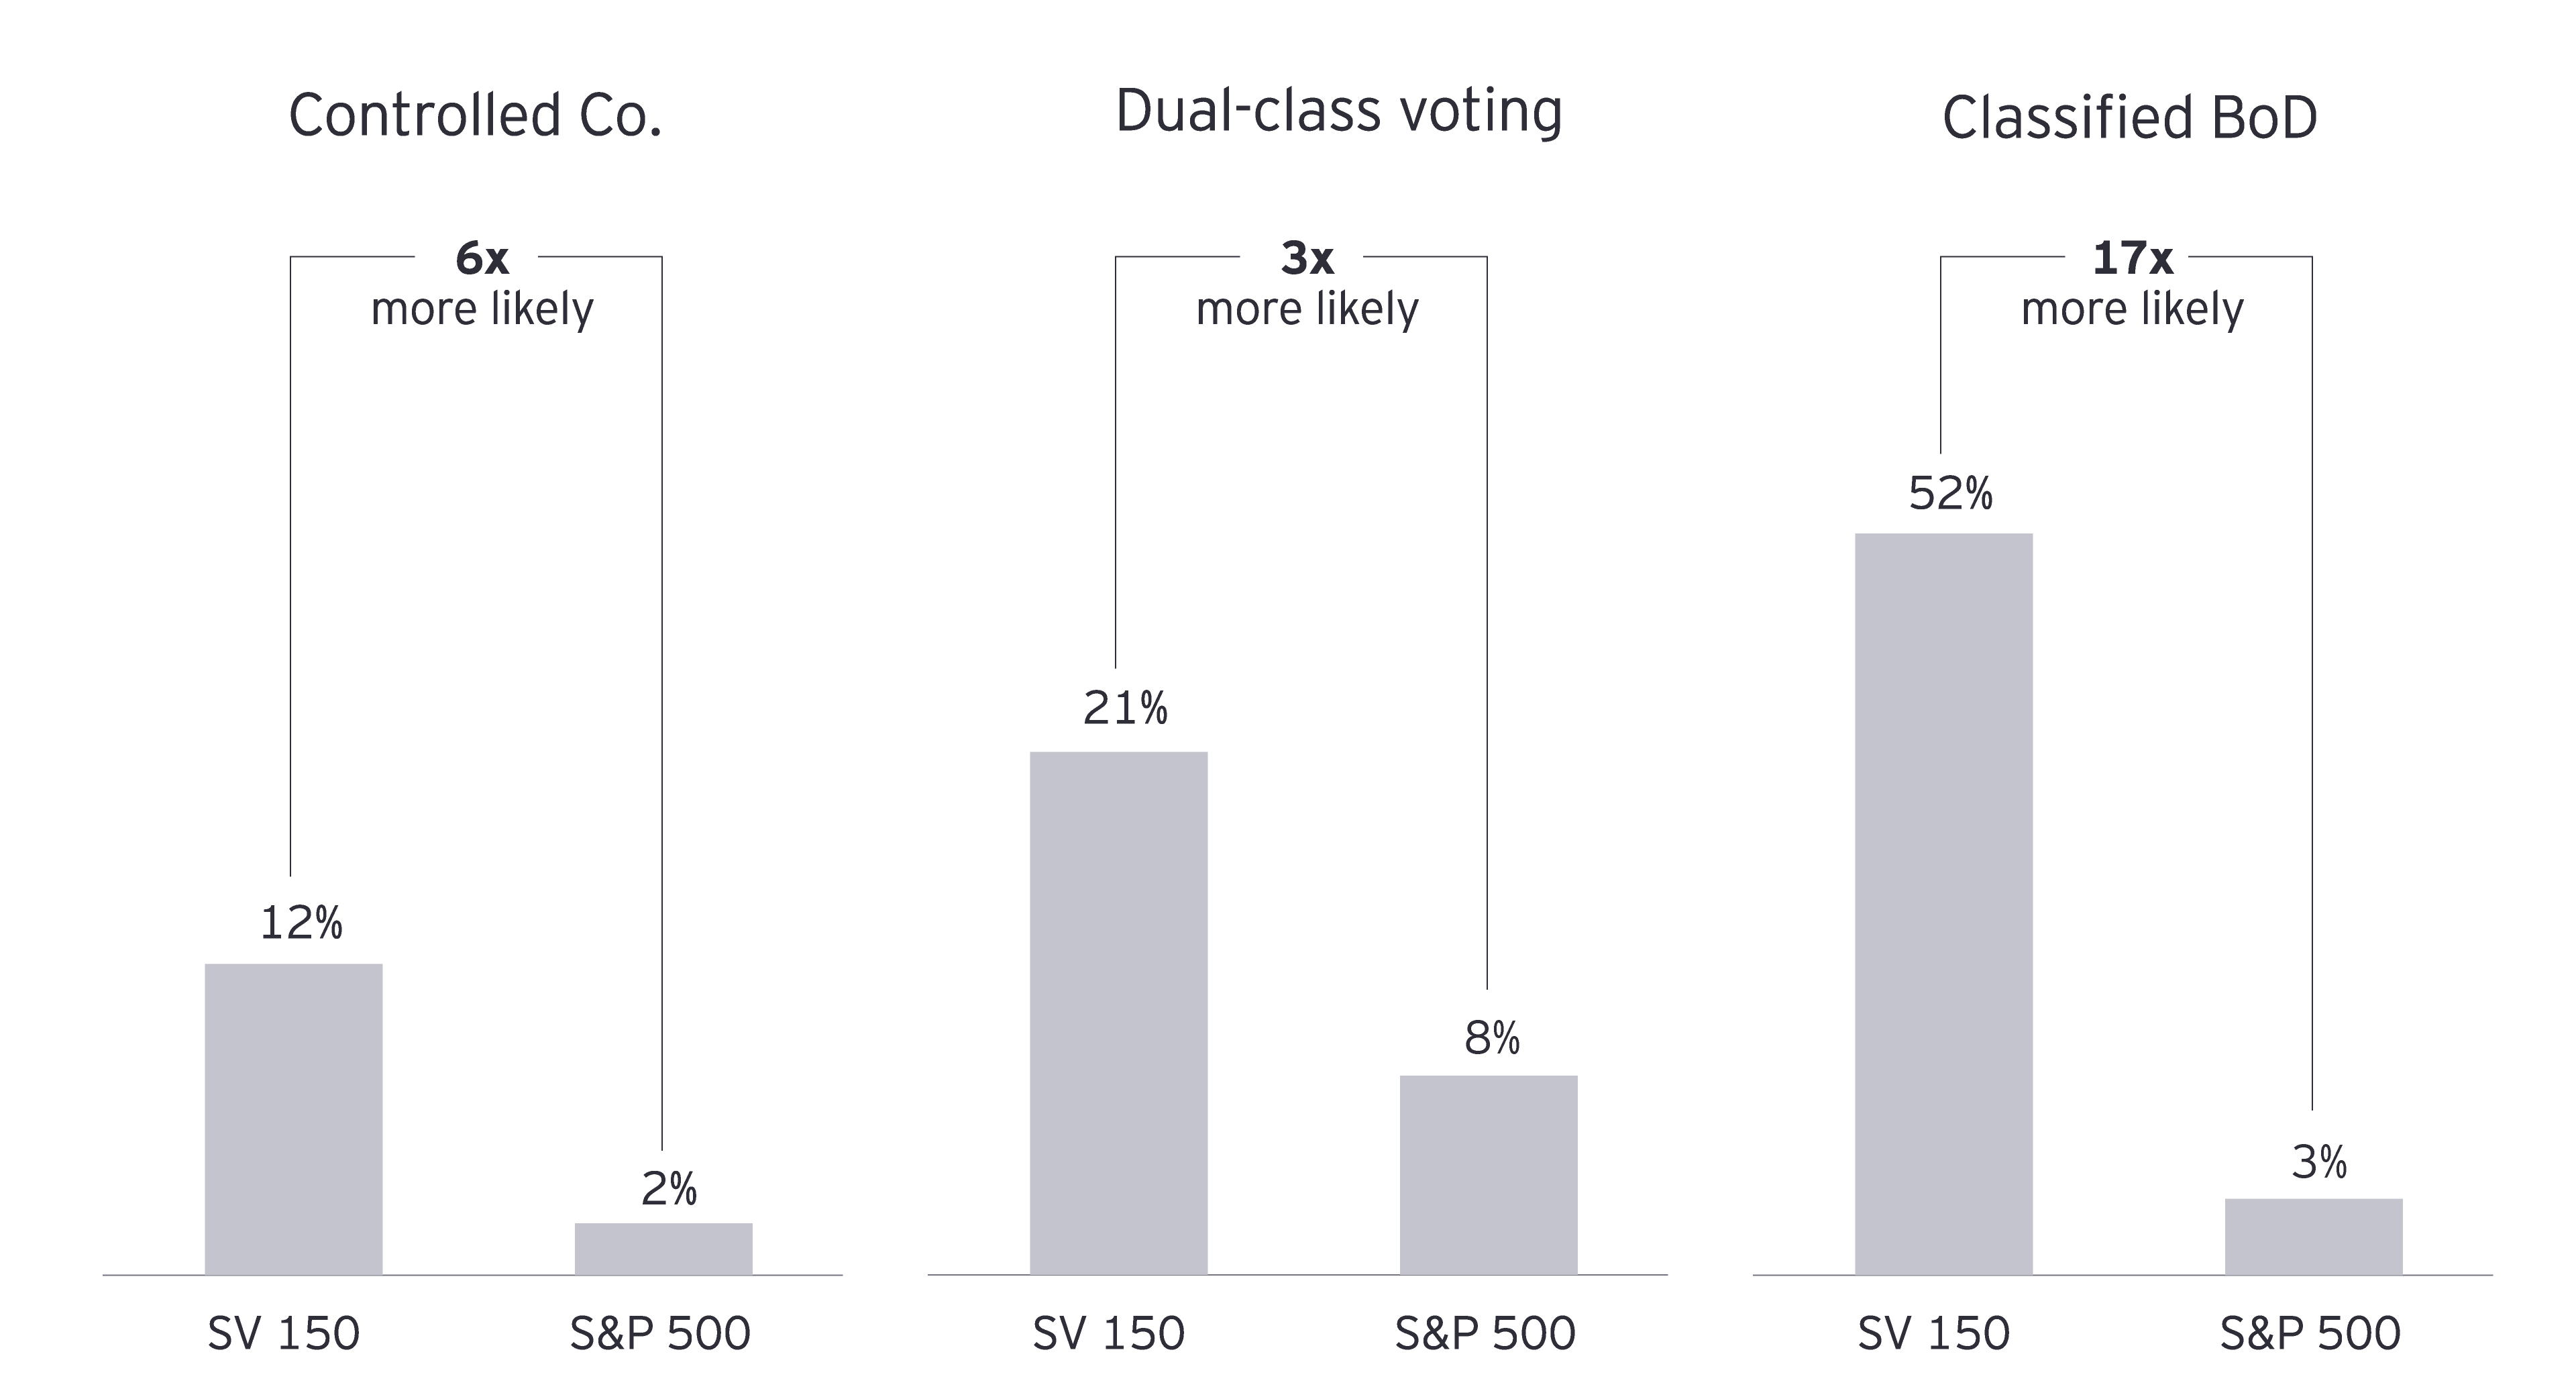 More U.S. Tech Companies are Adopting Dual-Class Voting Structures